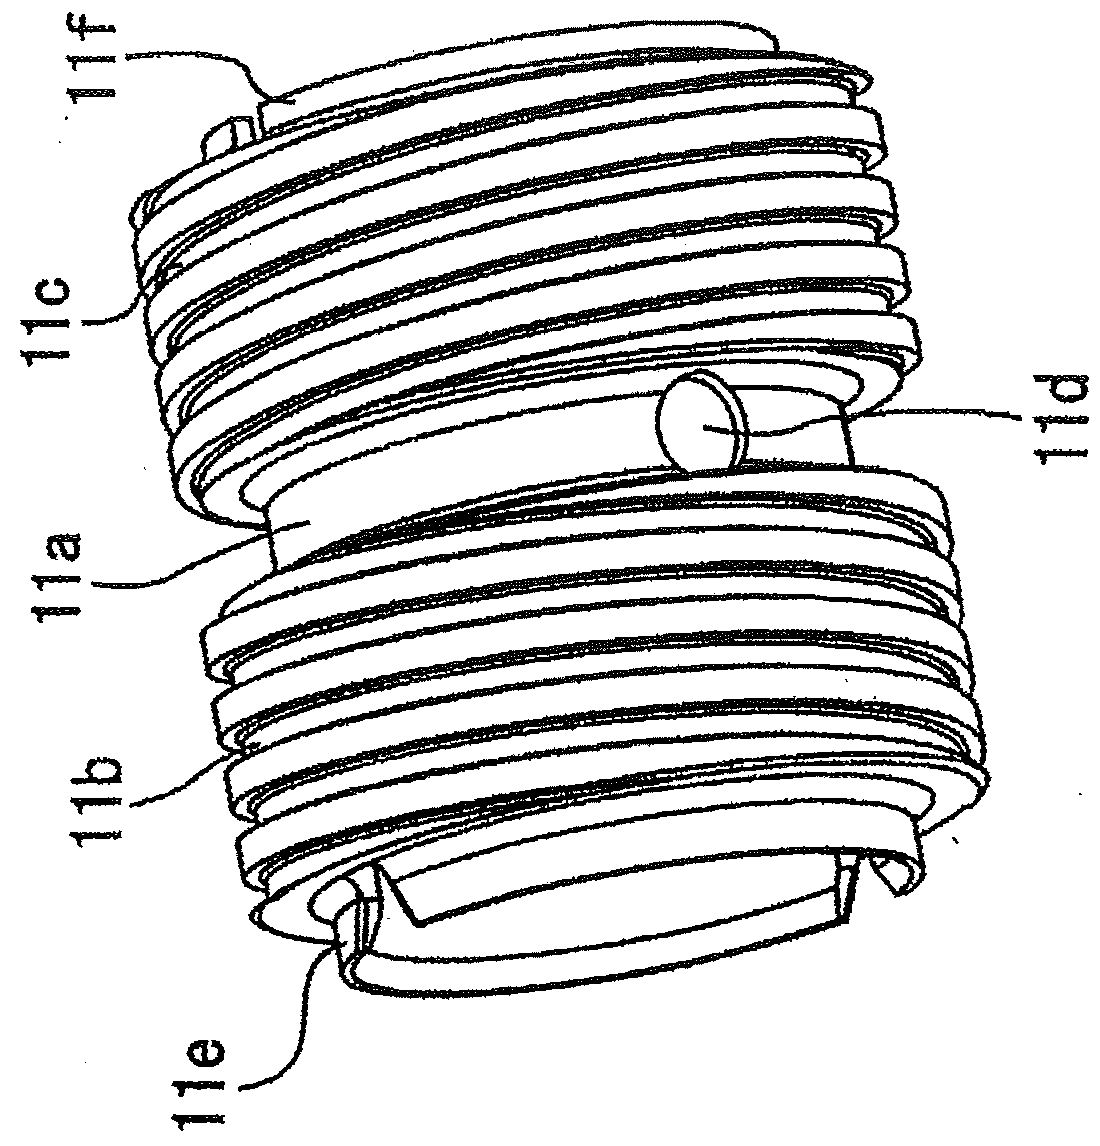 Lubricating Device for Transmission